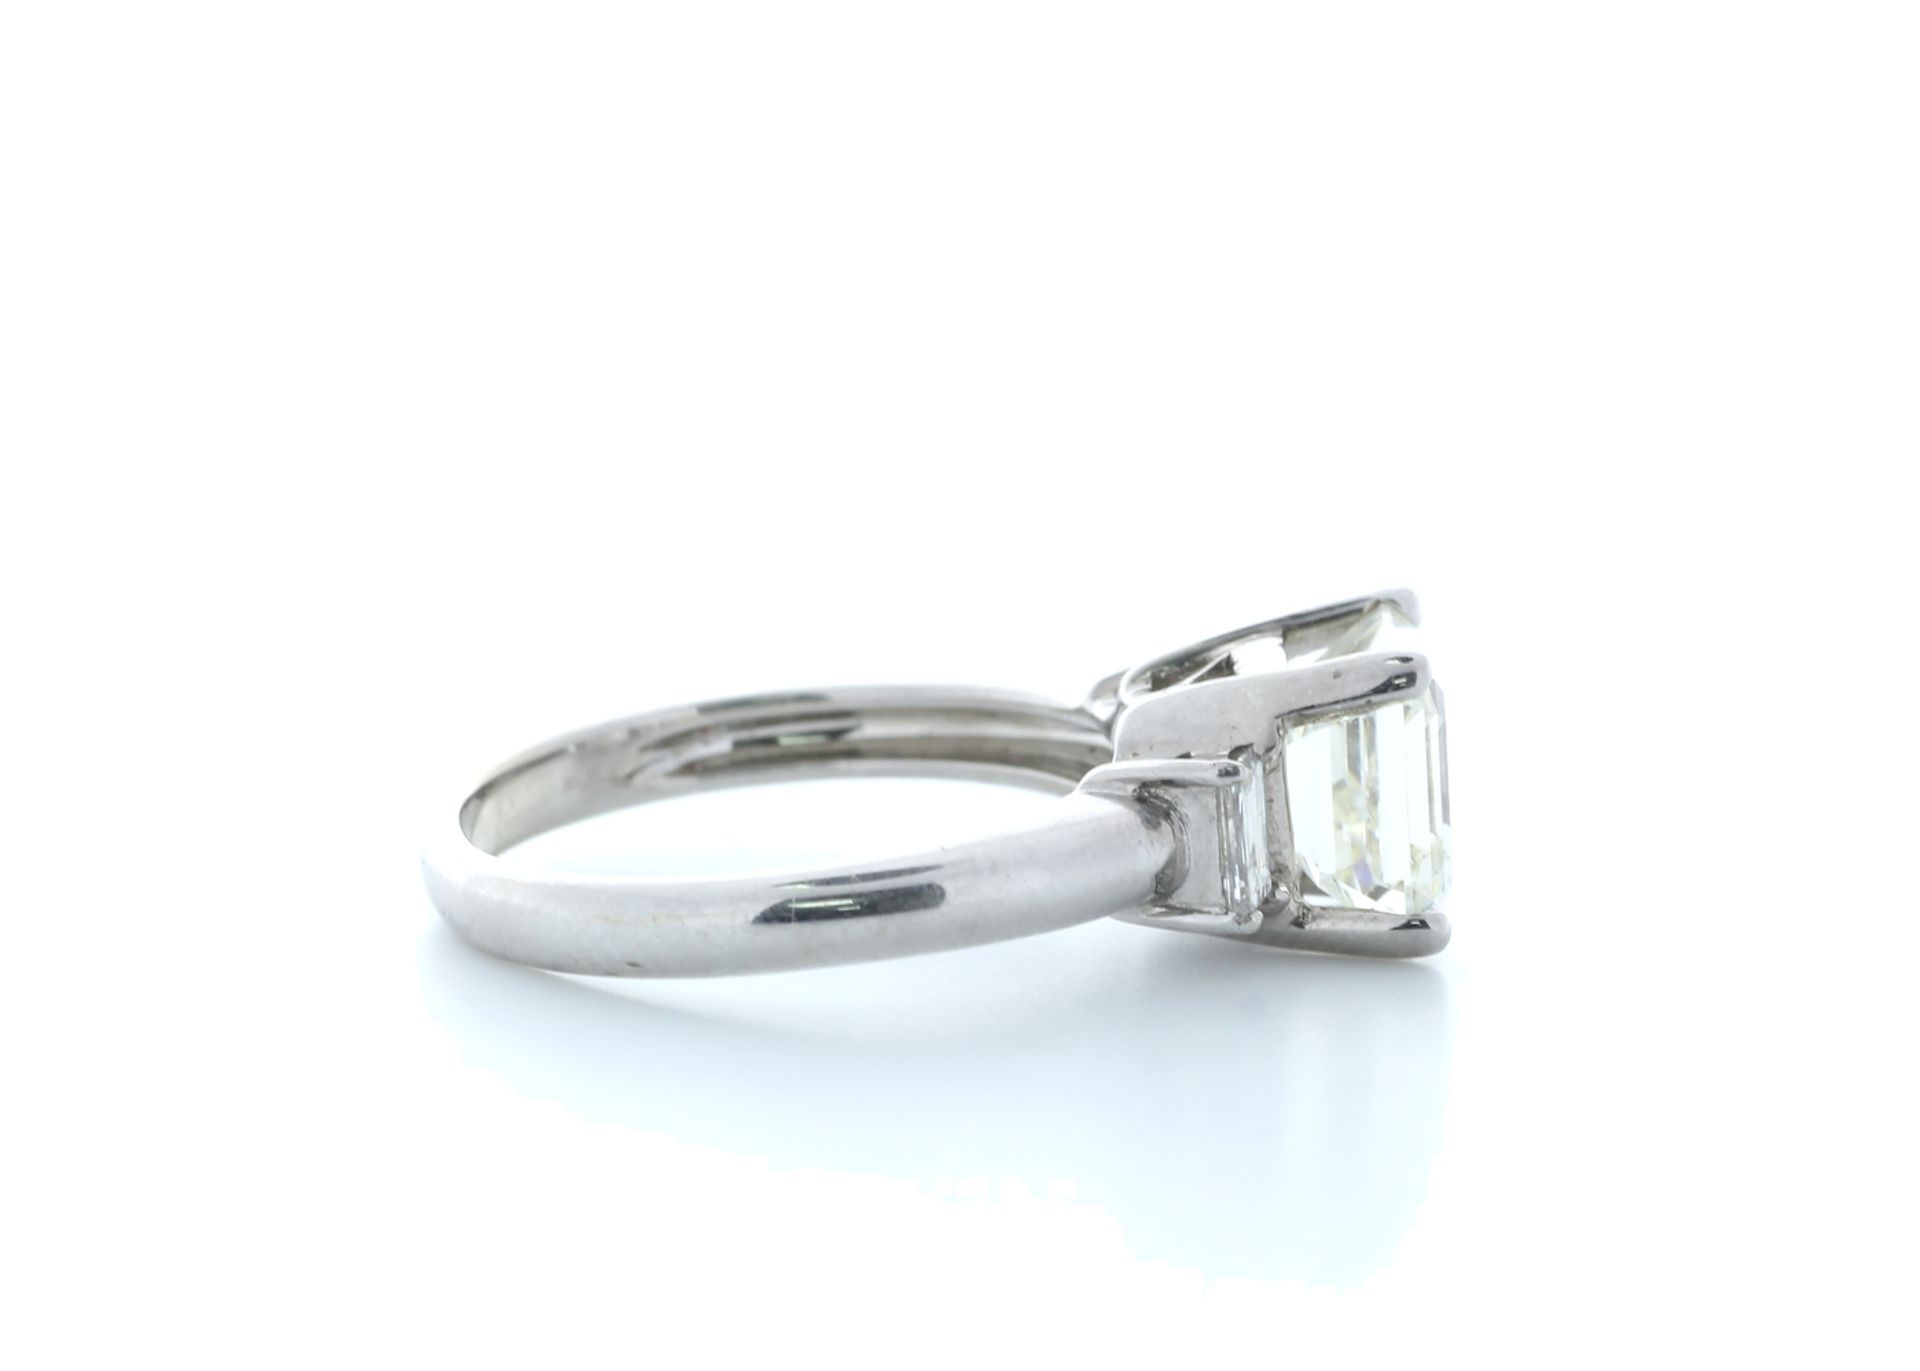 18ct White Gold Three Stone Claw Set Diamond Ring 3.11(2.70) Carats - Valued by IDI £93,500.00 - - Image 4 of 5